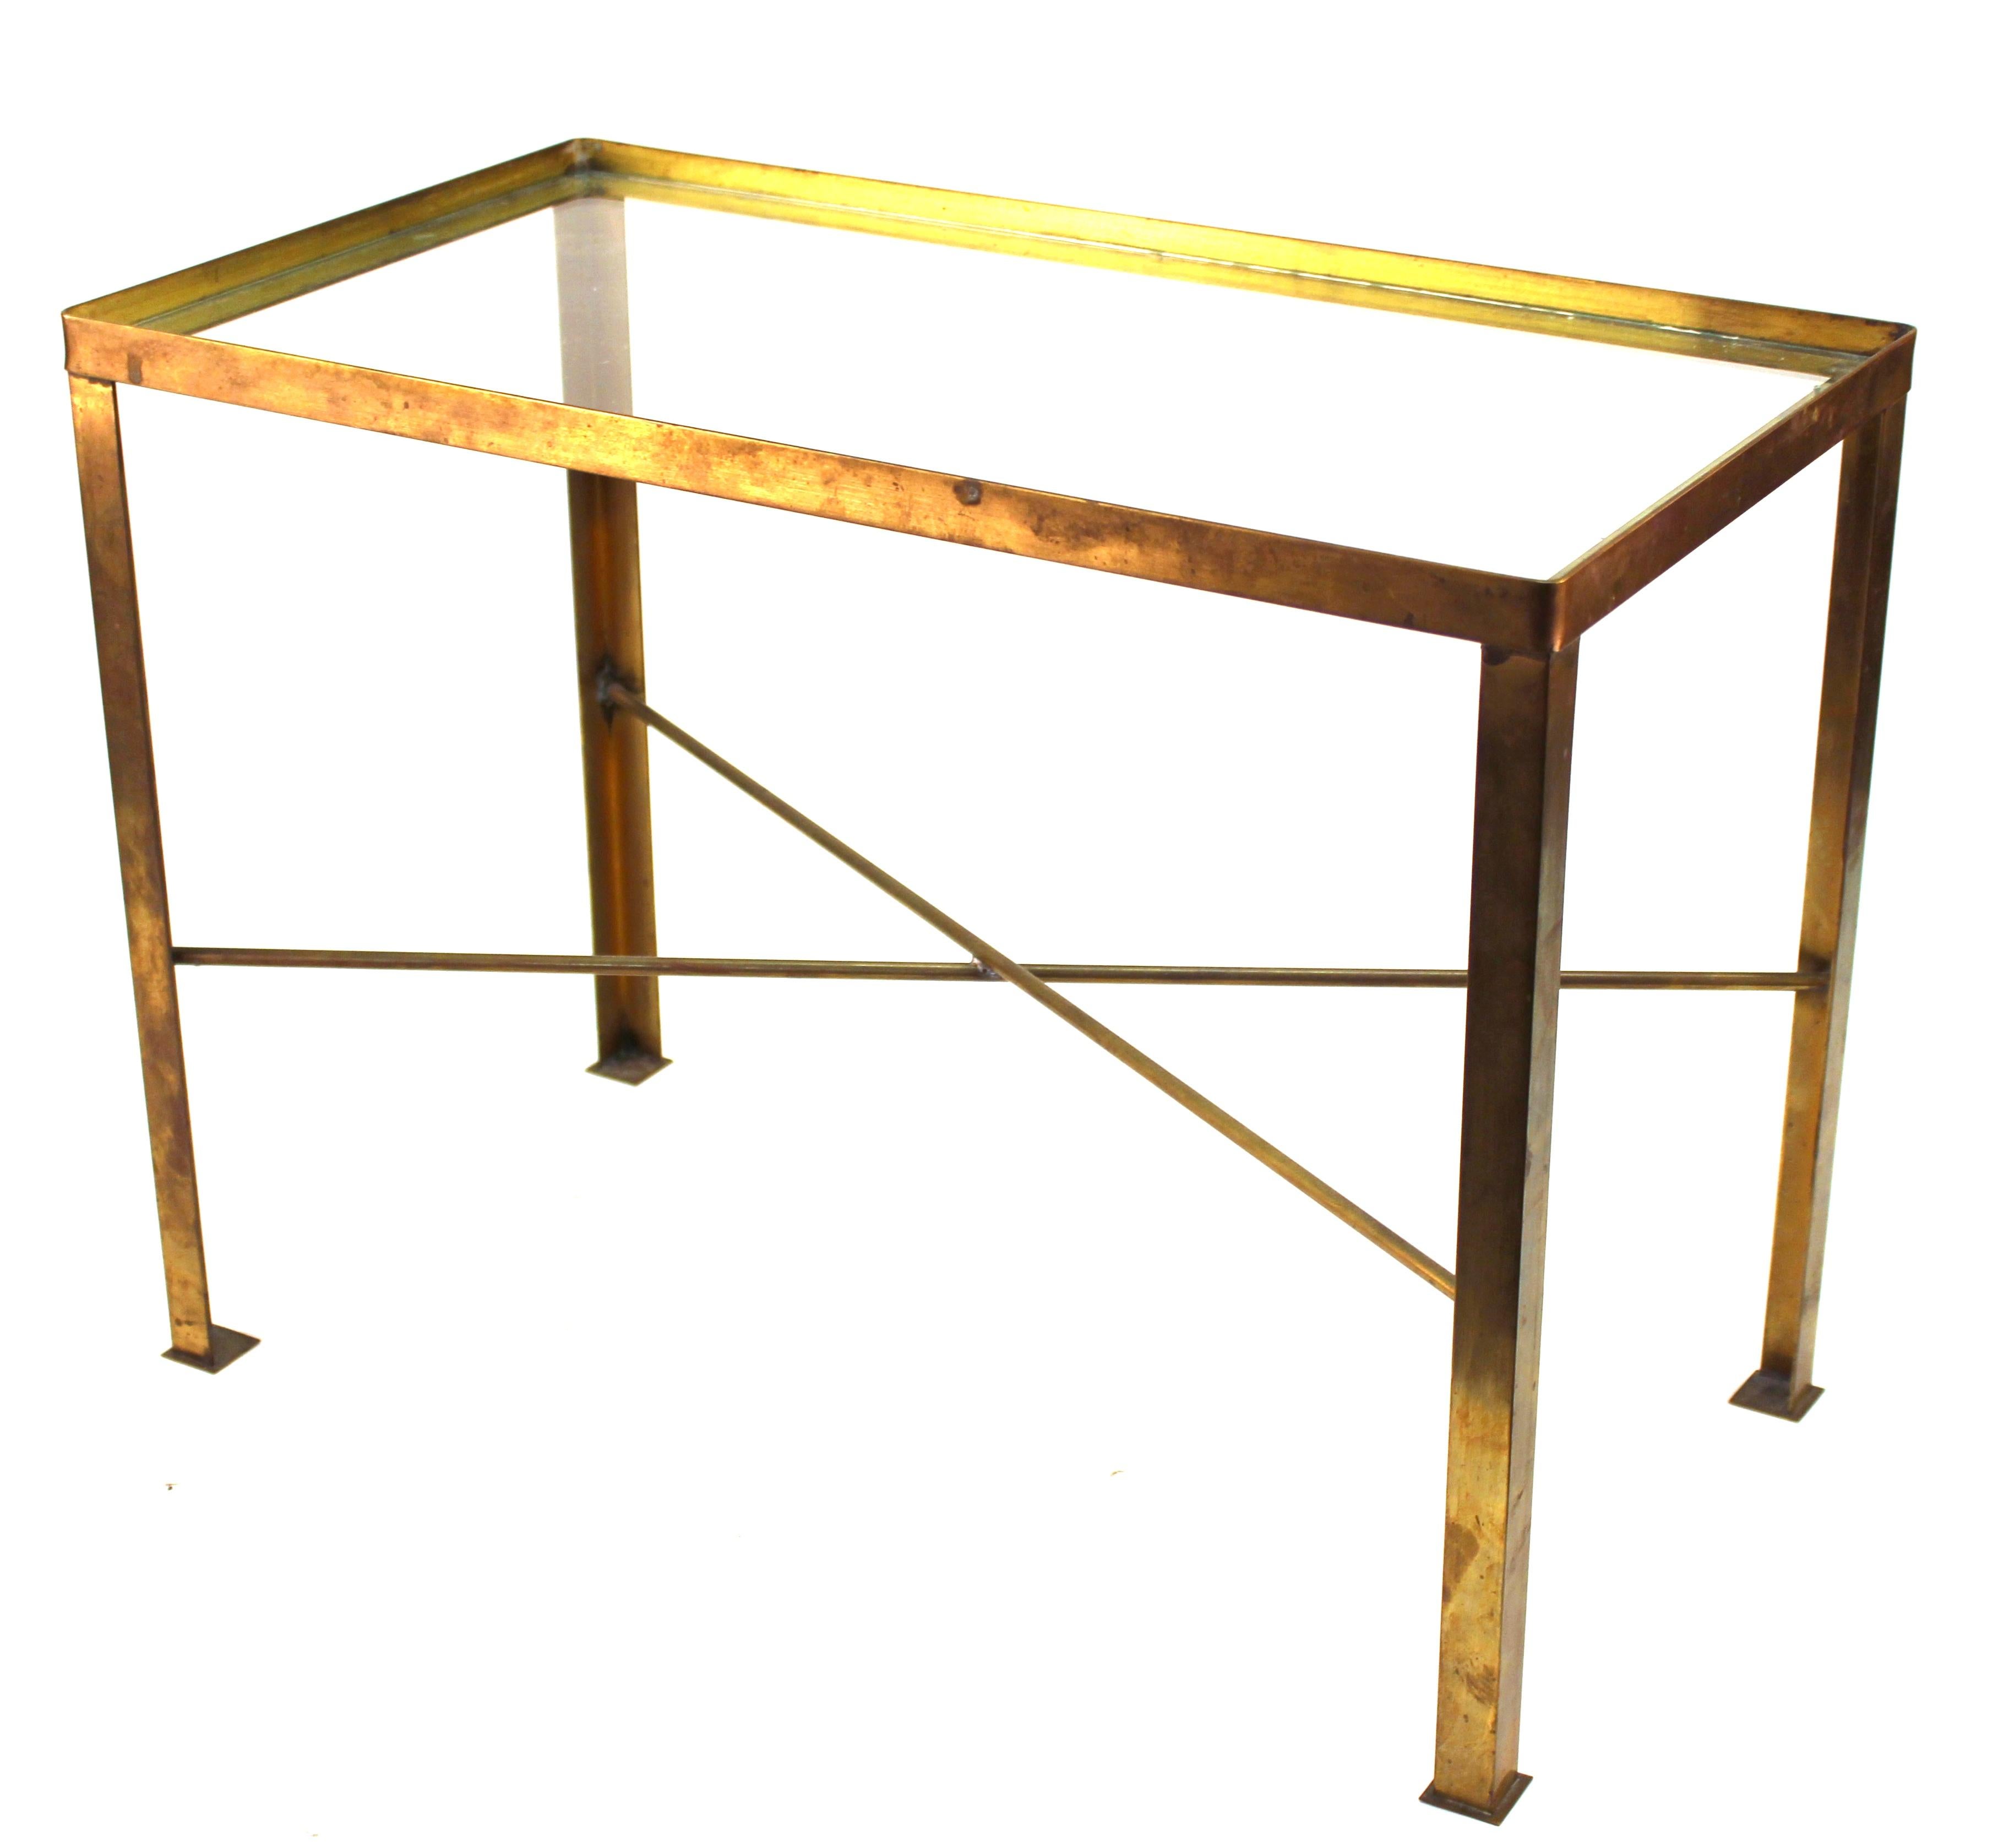 Mid-century modern diminutive rectangular side or center table in brass, with a glass top. The metal has some tarnish and age-related wear and is in great vintage condition.